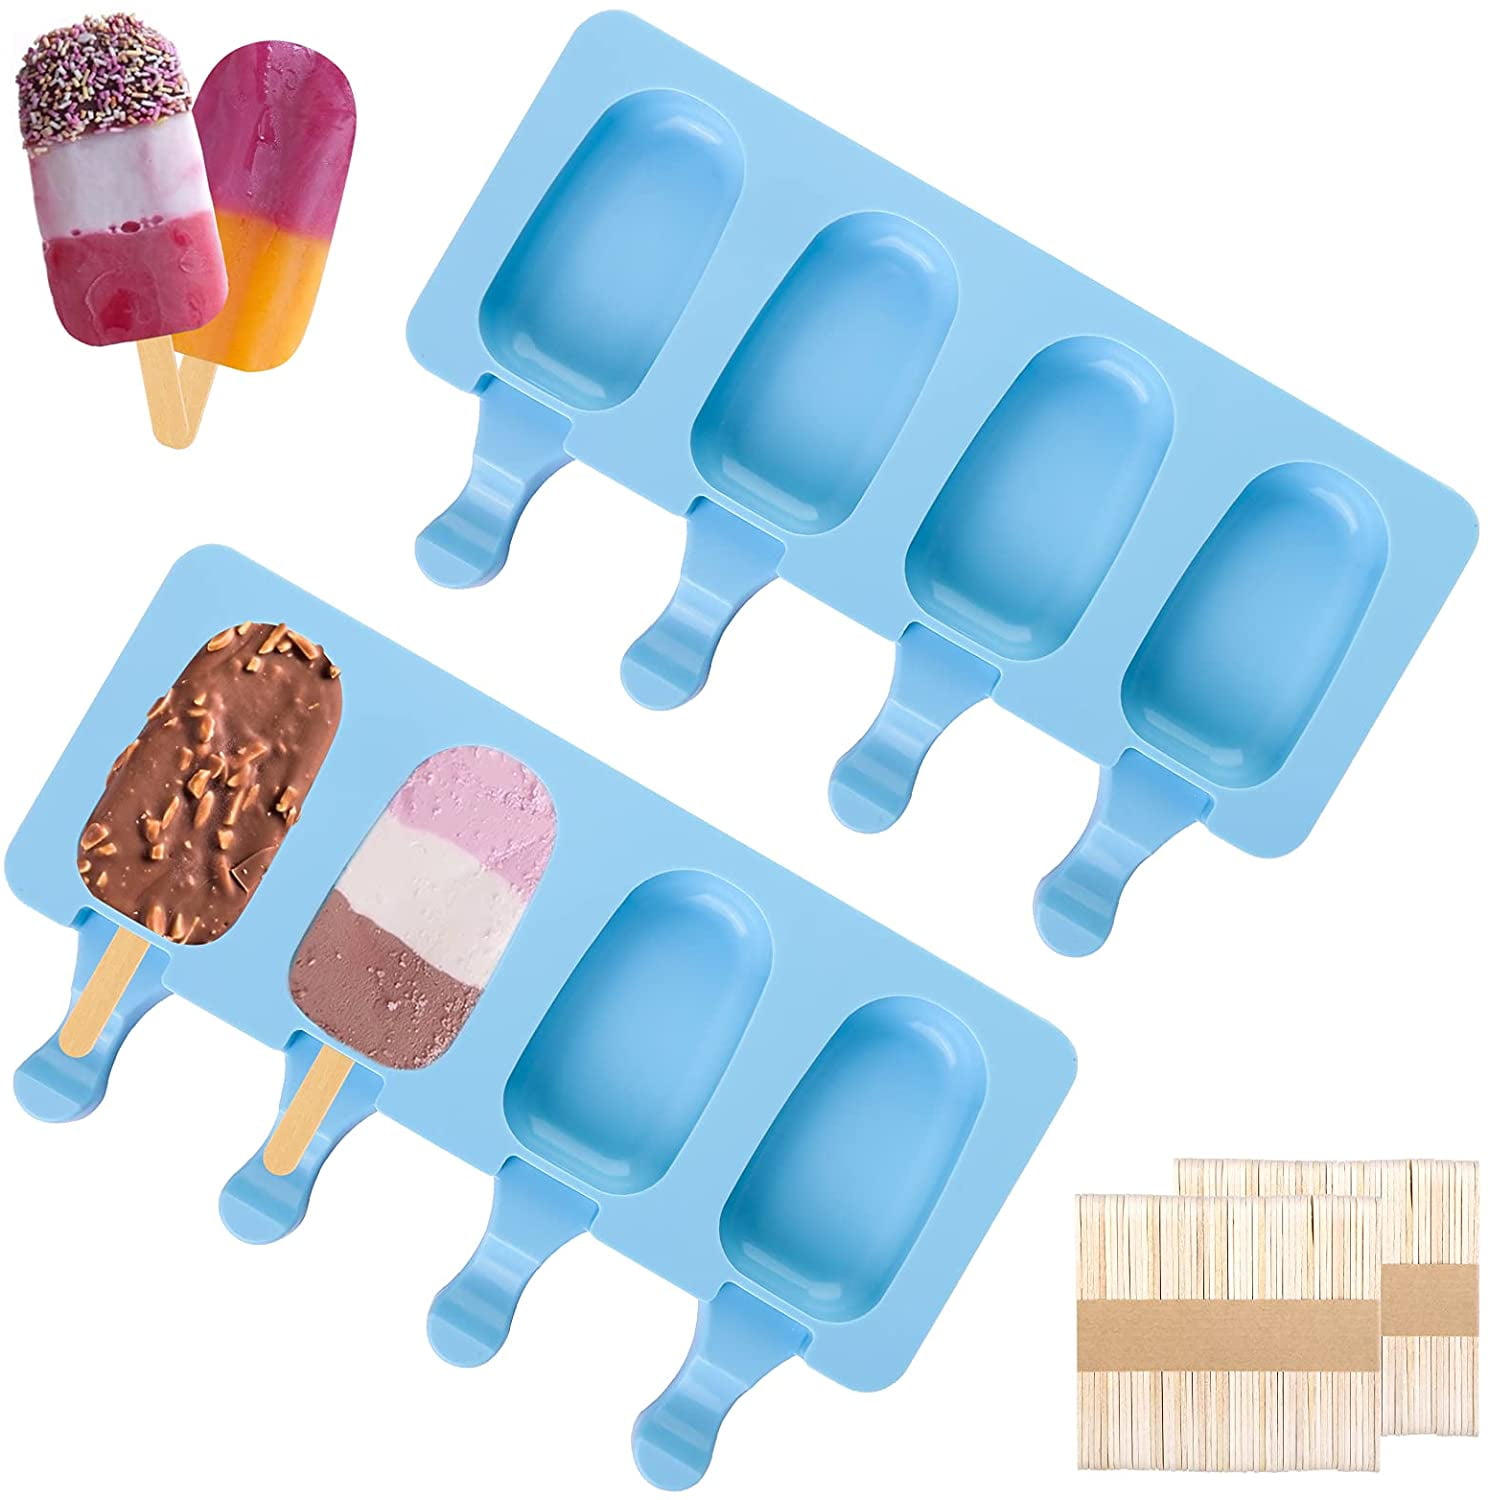 Oven and Freezer Safe   Homemade Treats Cake Pop Molds Baking Molds 100 sticks Silicone Ice Cream Mold Set of 2-Durable  Large Size Popsicle and Cakesicle Molds with 4 Cavities 